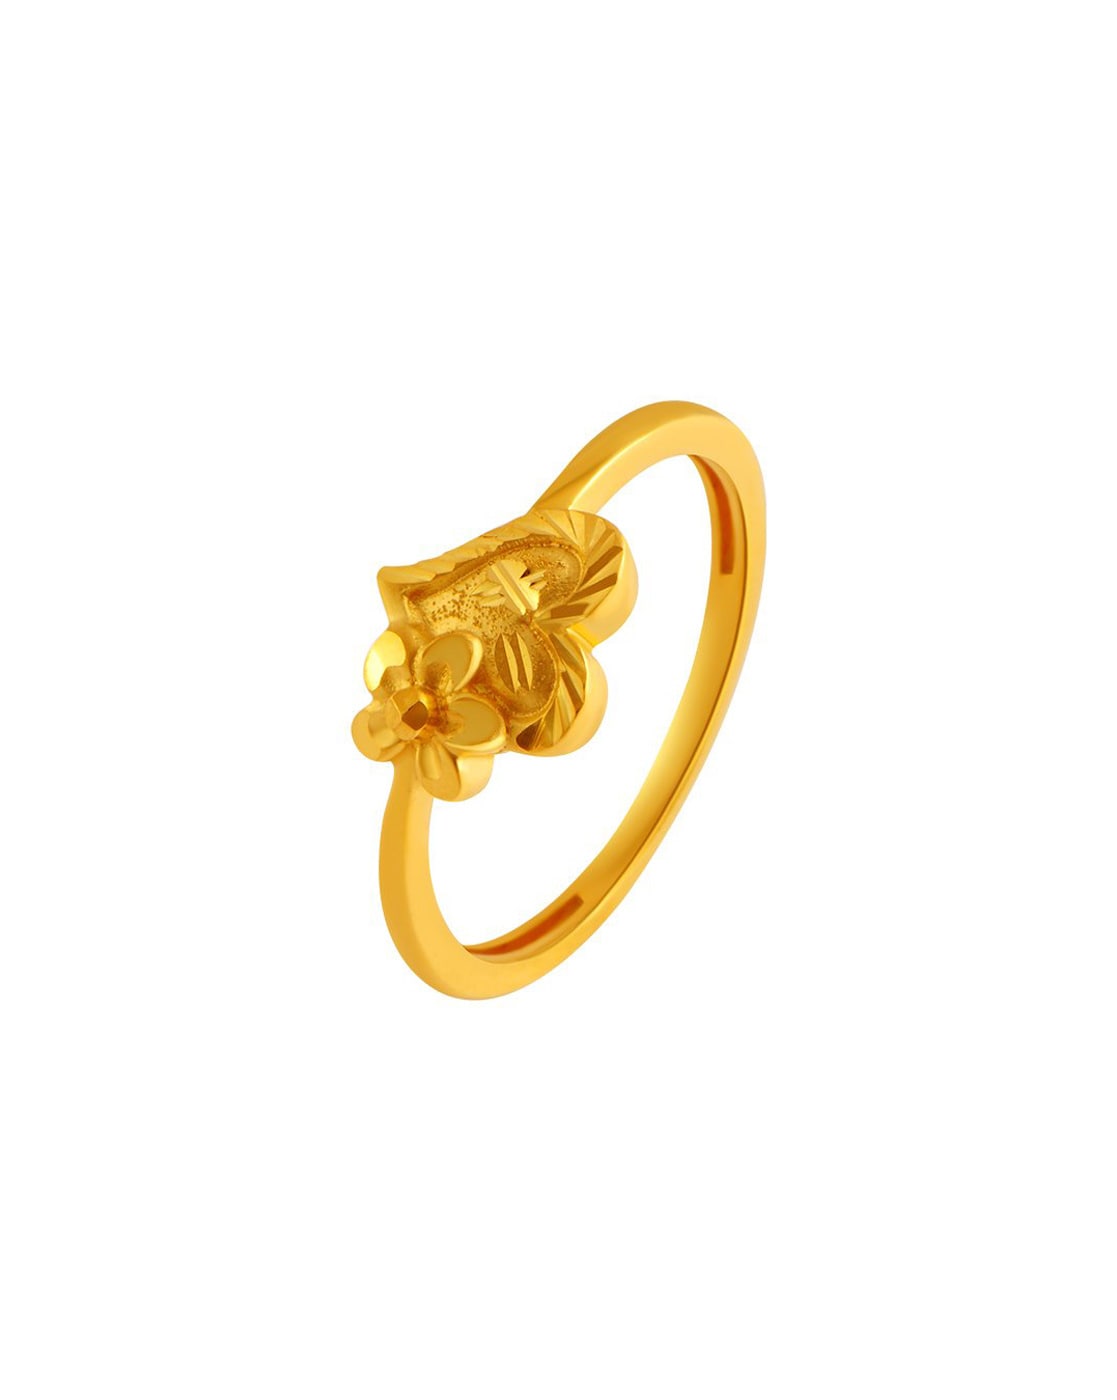 Valentine's day gifts for her | 22K Heart motif gold ring ? PC Chandra